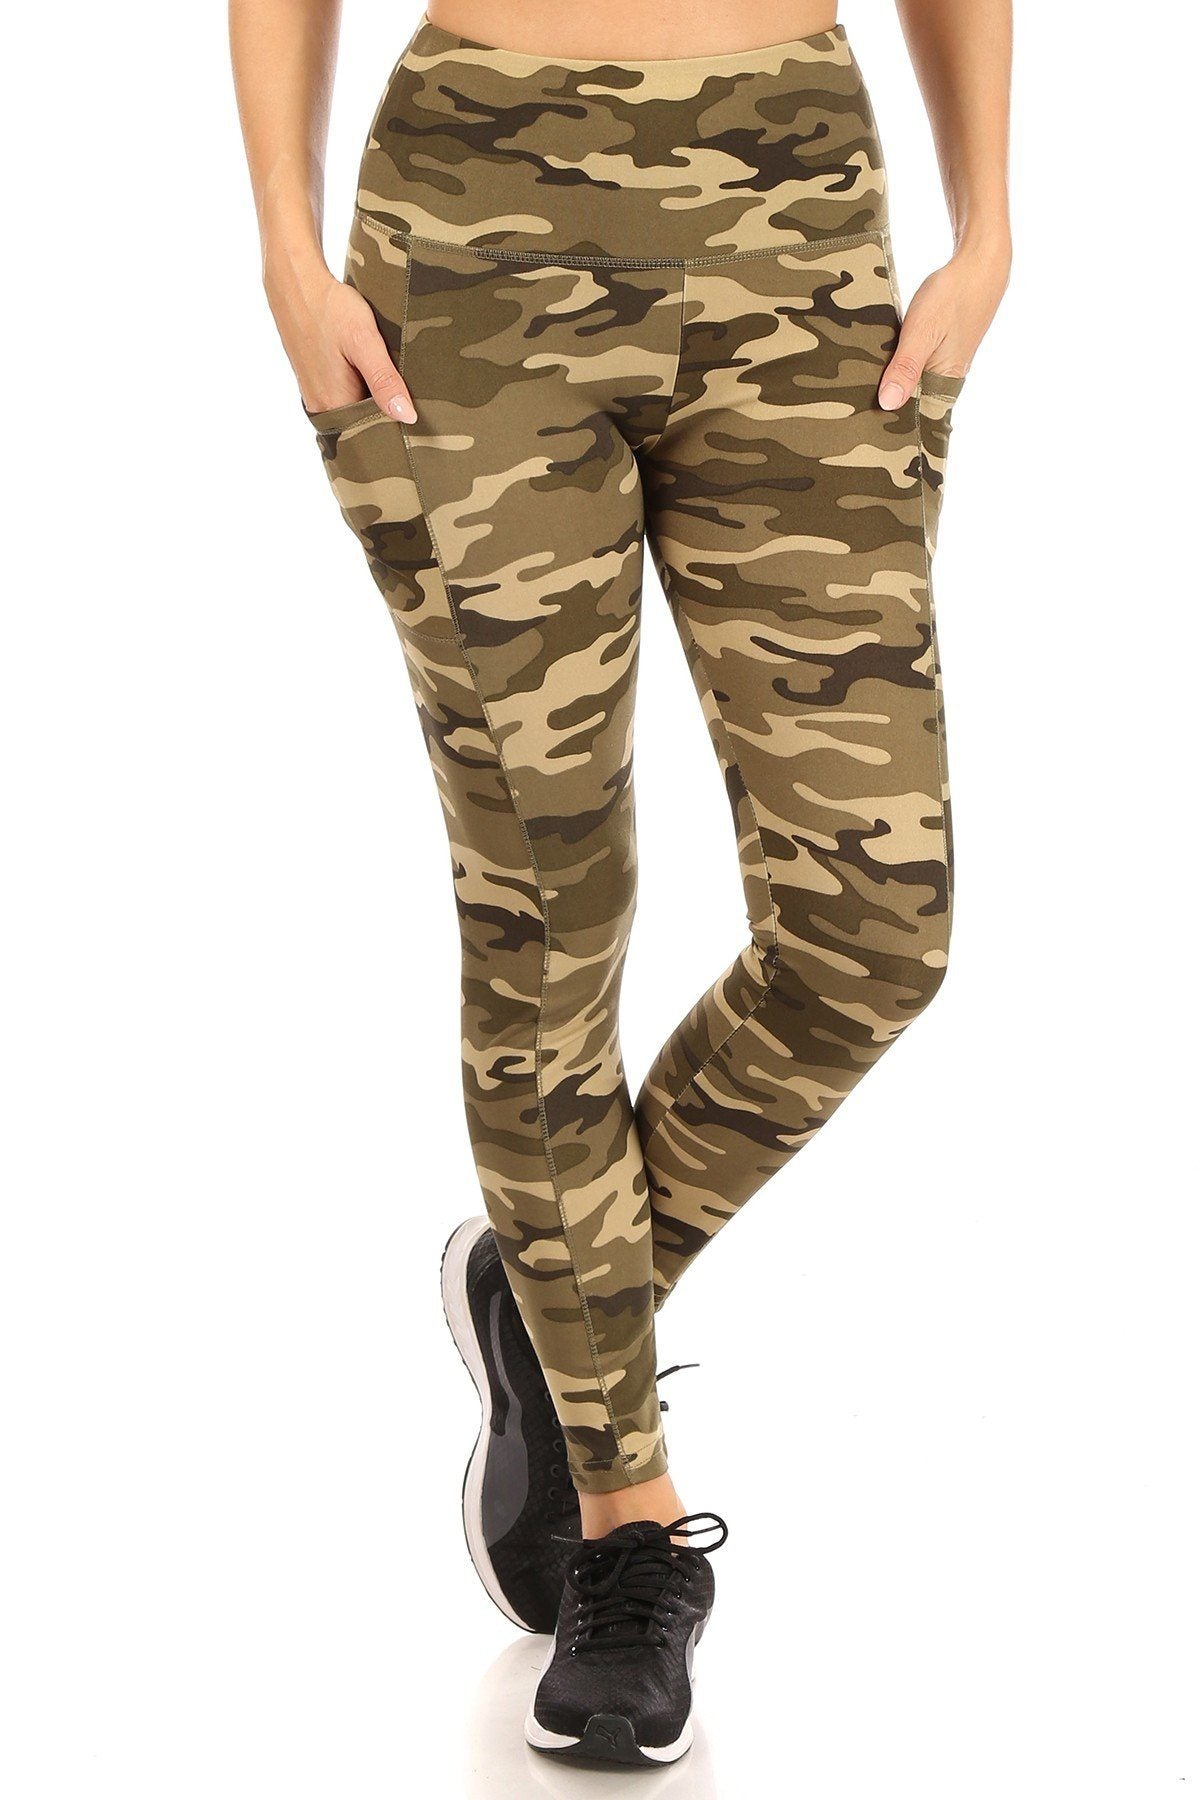 Womens Plus Size Camouflage Pocket Leggings: 1xl-2xl-3xl Leggings MomMe and More 